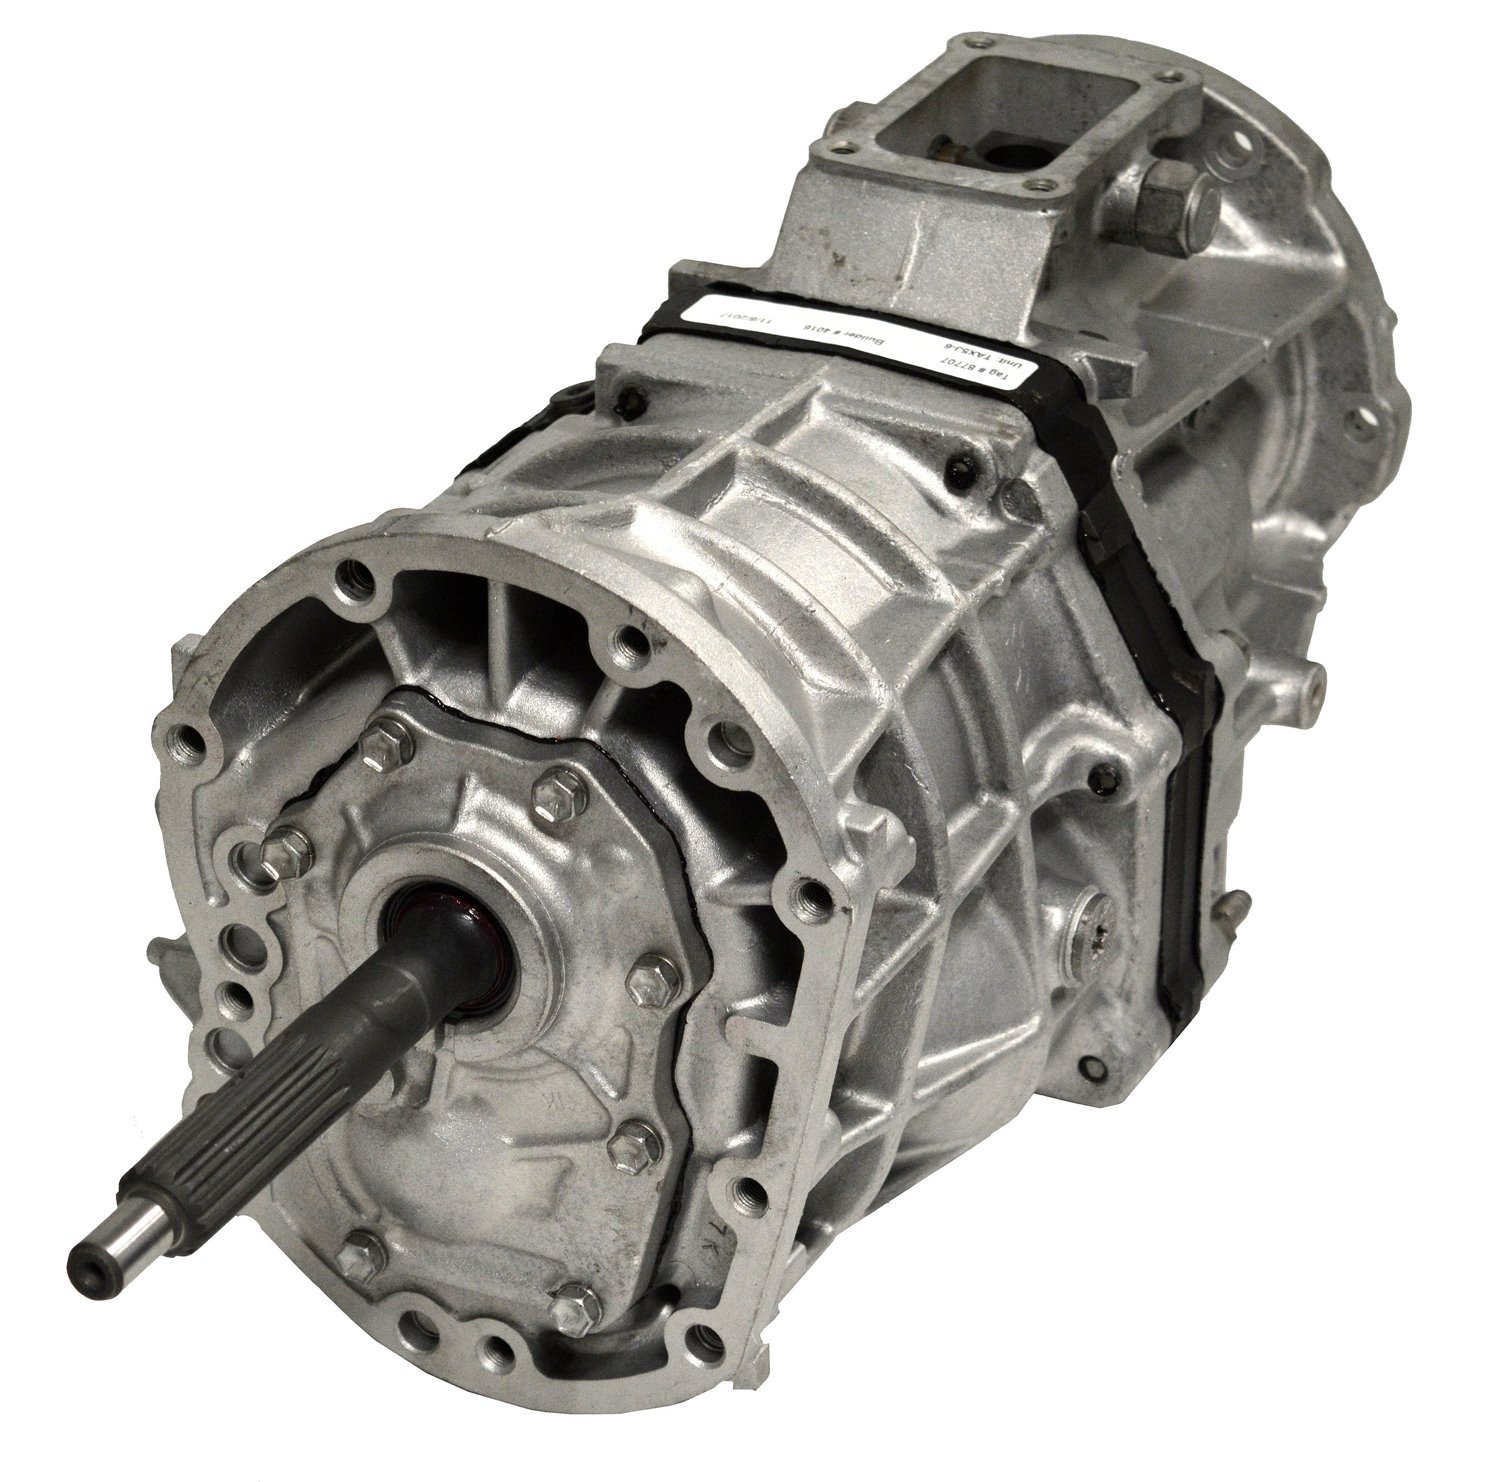 Remanufactured AX5 Manual Transmission for Jeep 87-93 Cherokee,